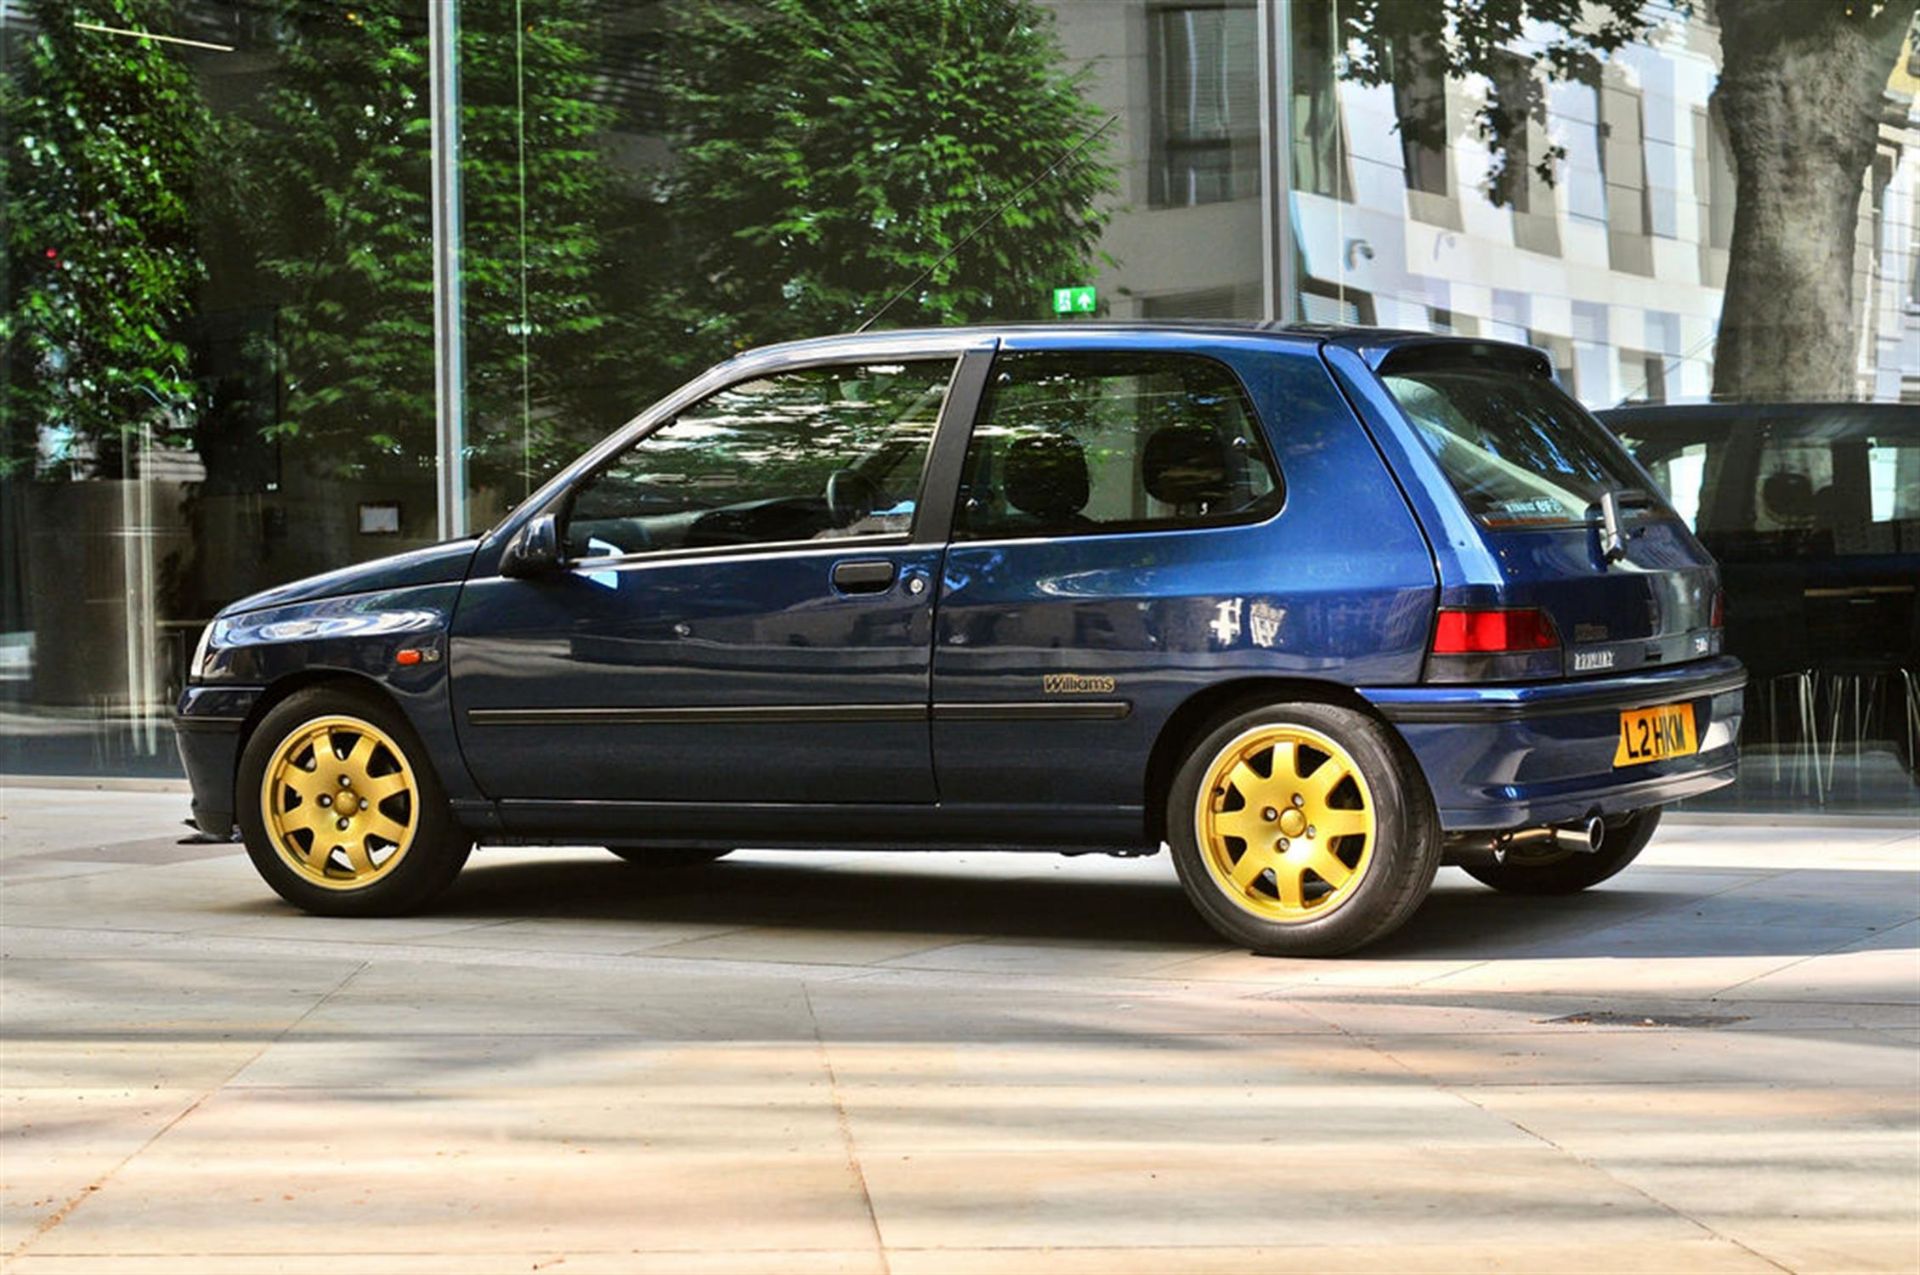 1994 Renault Clio Williams (Phase One) #0180 - Image 4 of 10